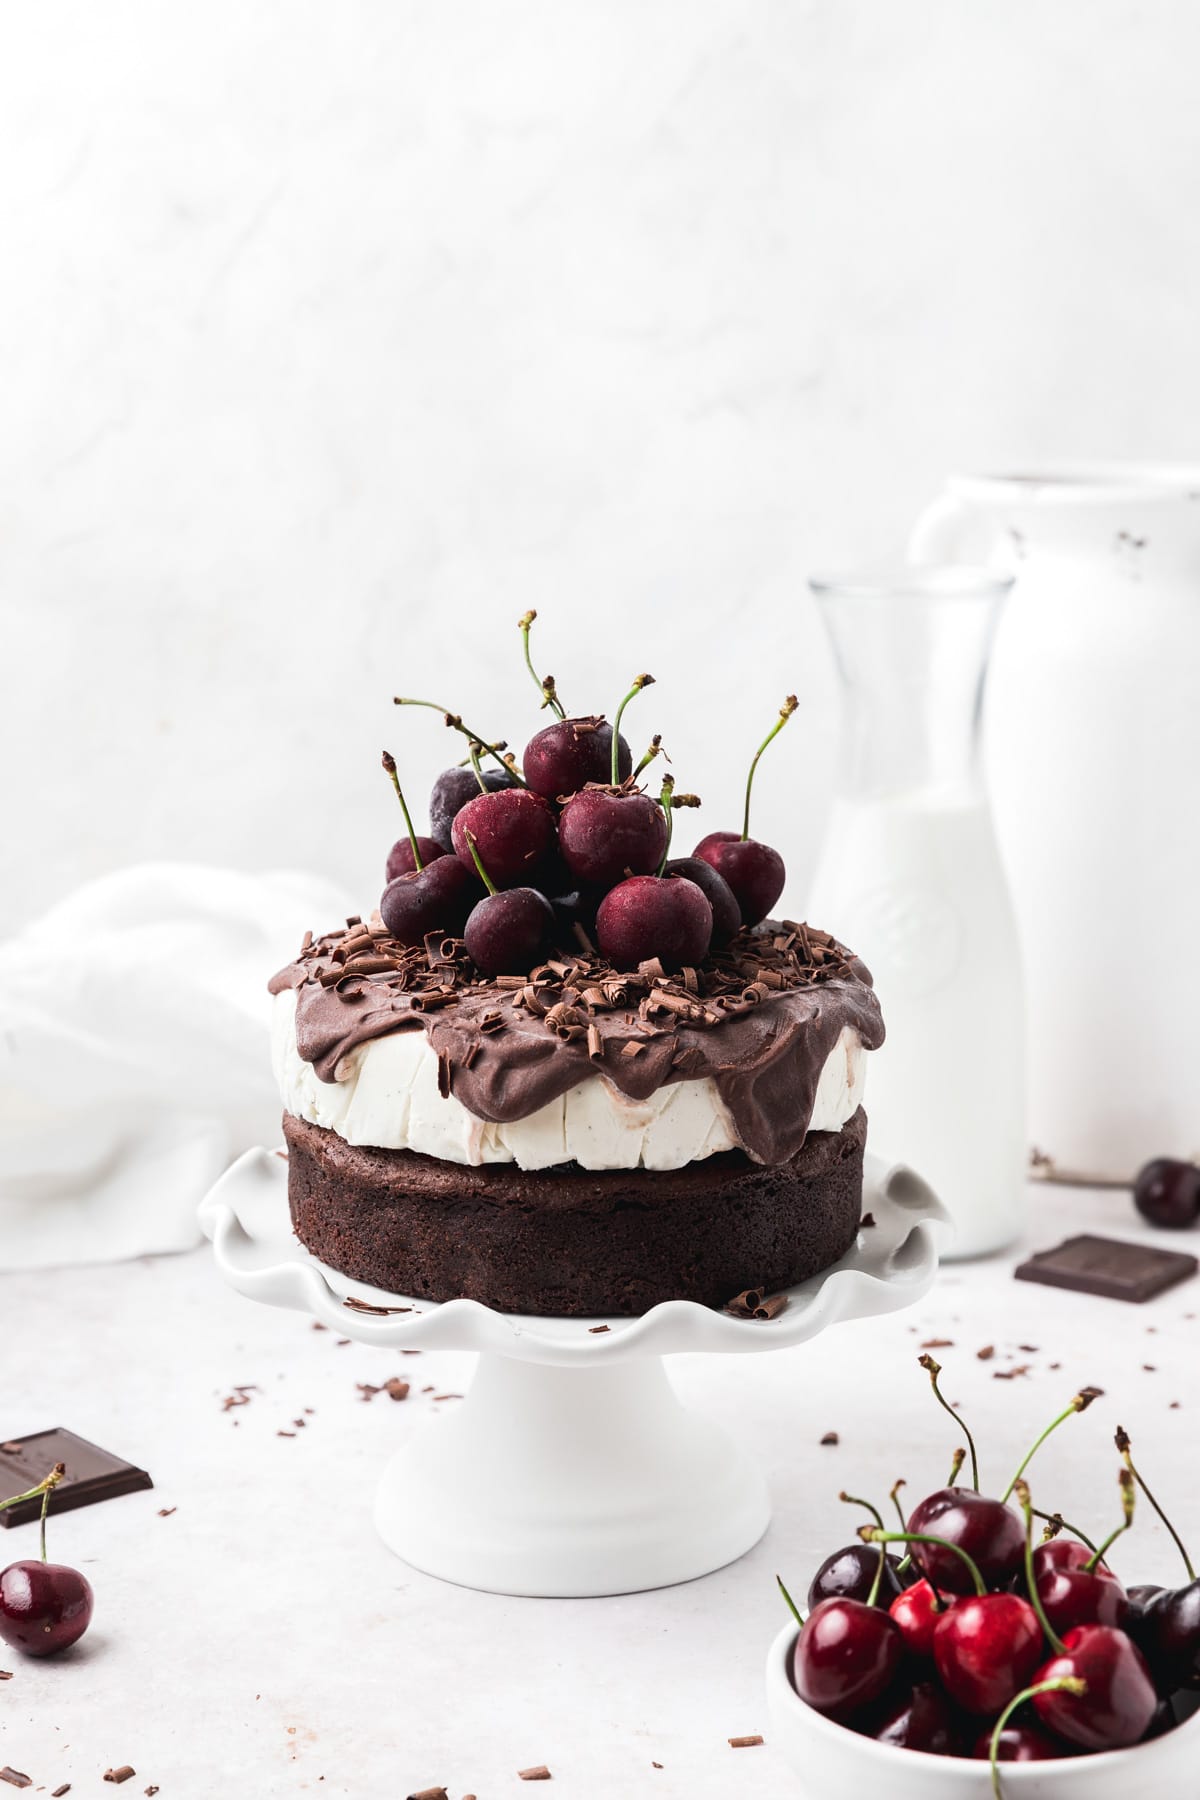 black forest ice cream cake topped with chocolate ganache and cherries.